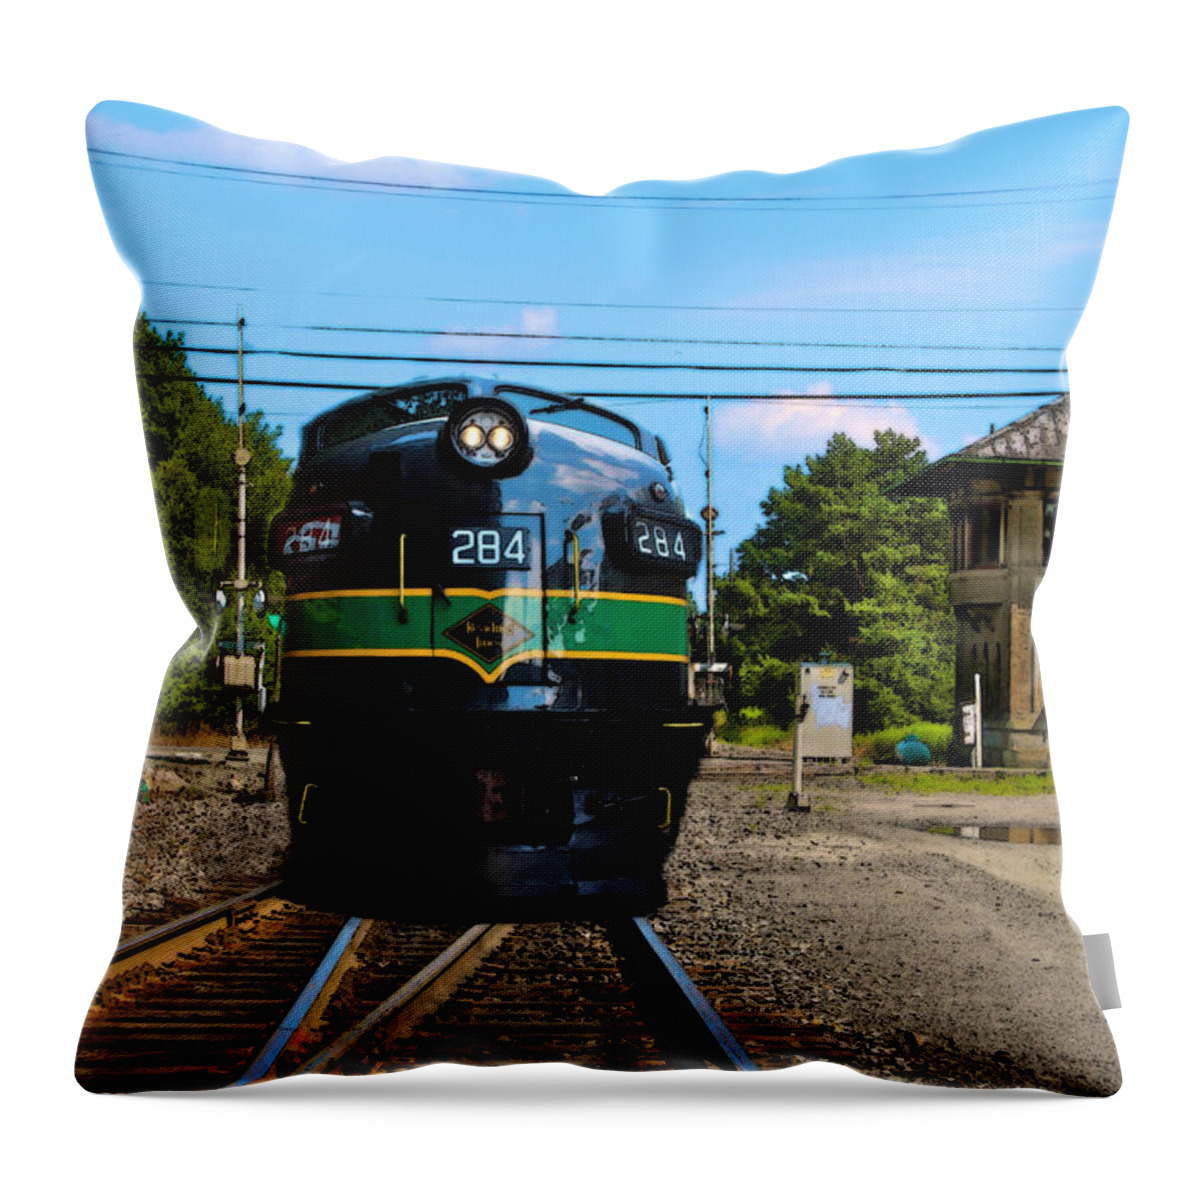 Train Art Throw Pillow featuring the painting Reading 284 Train by Iconic Images Art Gallery David Pucciarelli